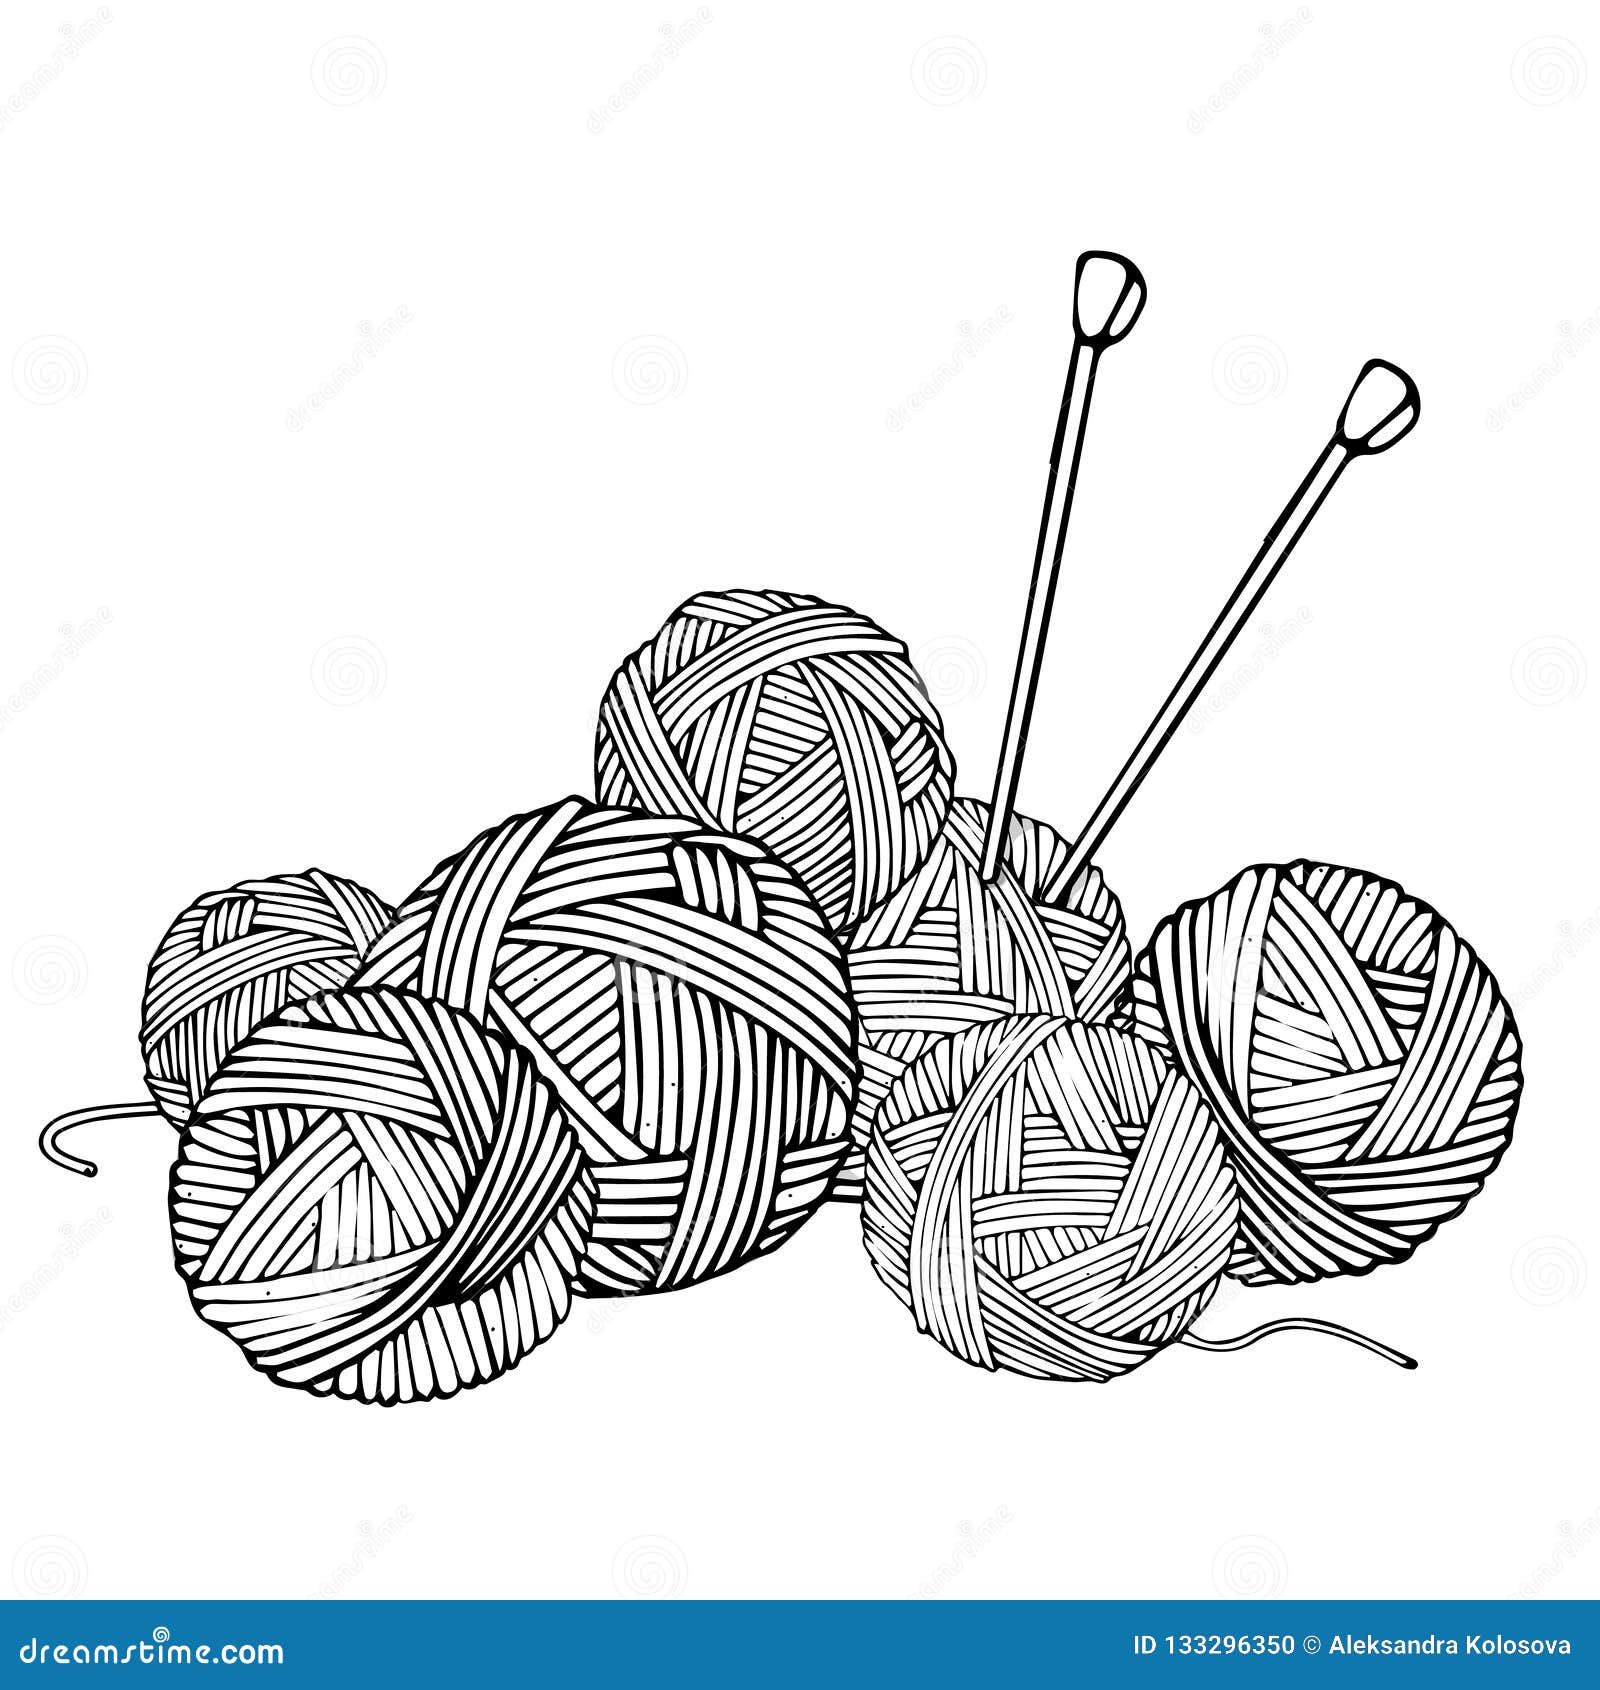 73845 Wool Drawing Images Stock Photos  Vectors  Shutterstock